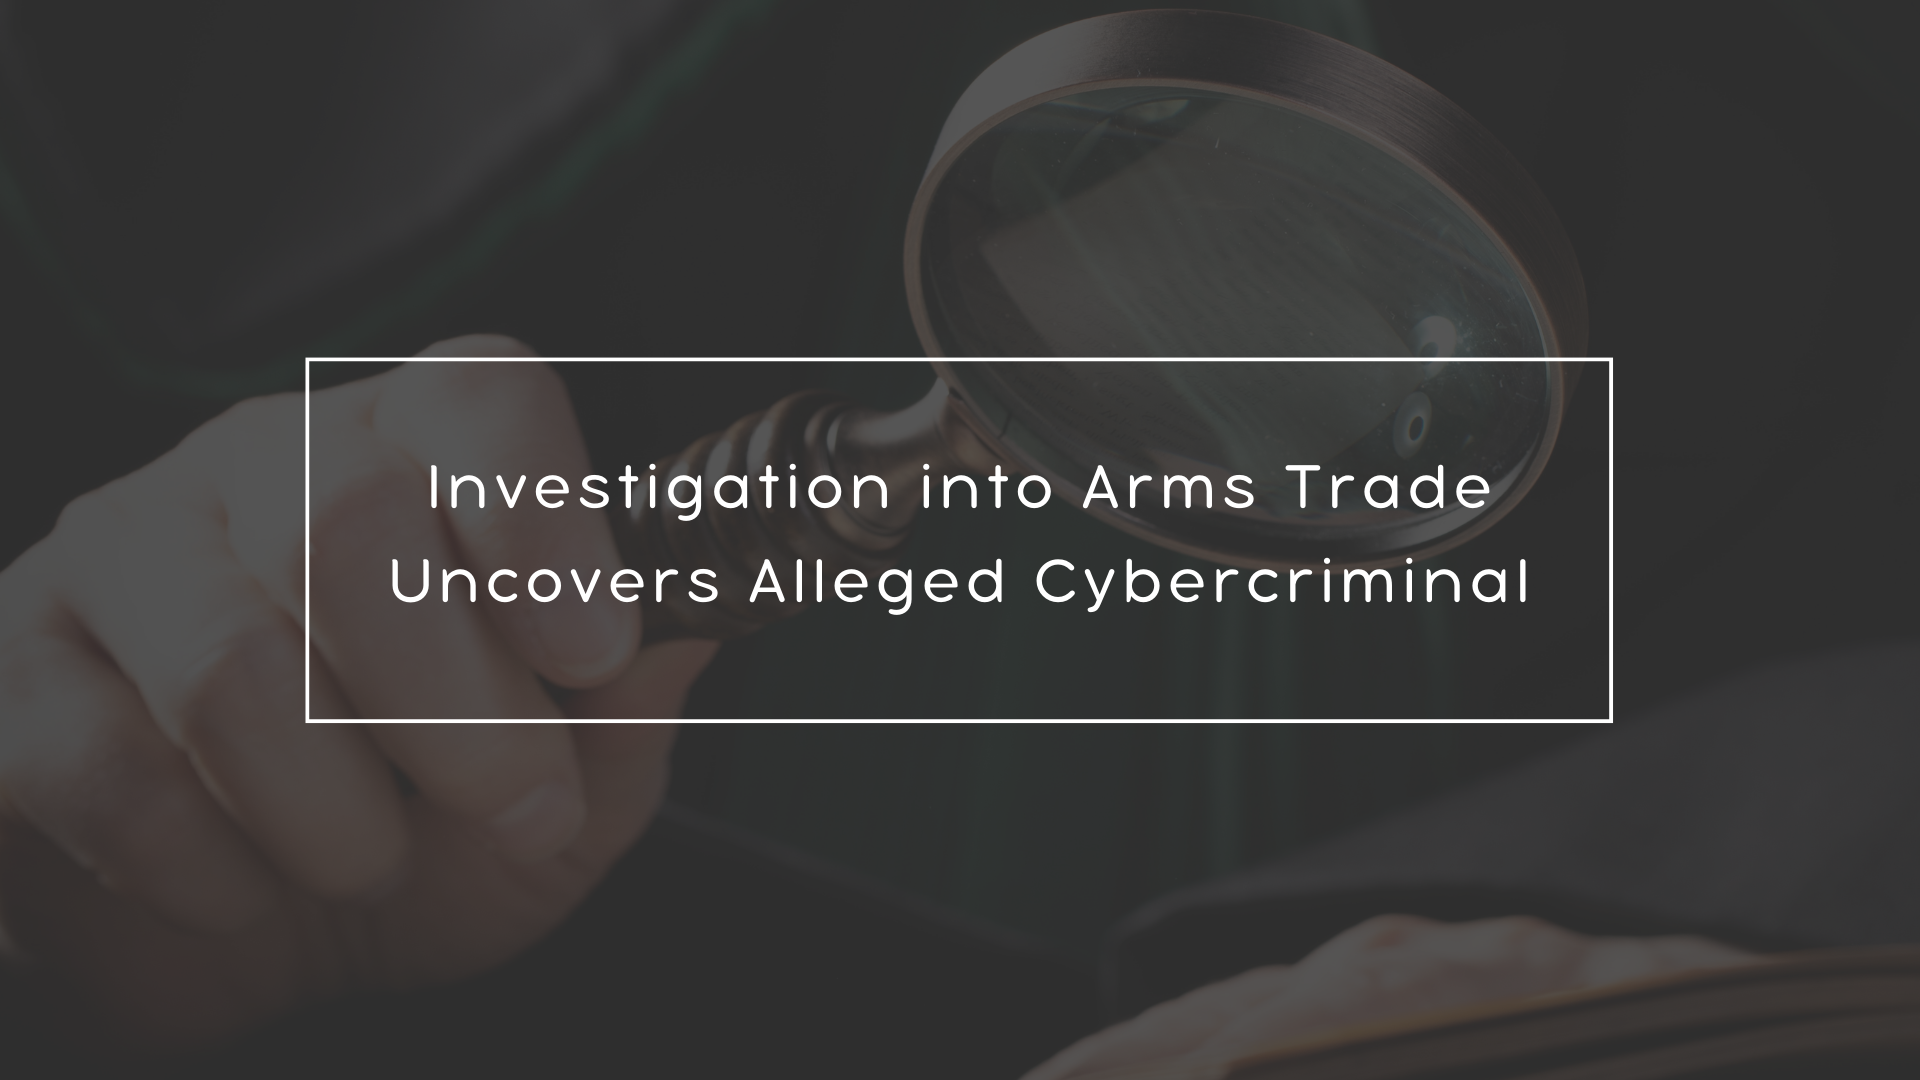 Investigation into Arms Trade Uncovers Alleged Cybercriminal